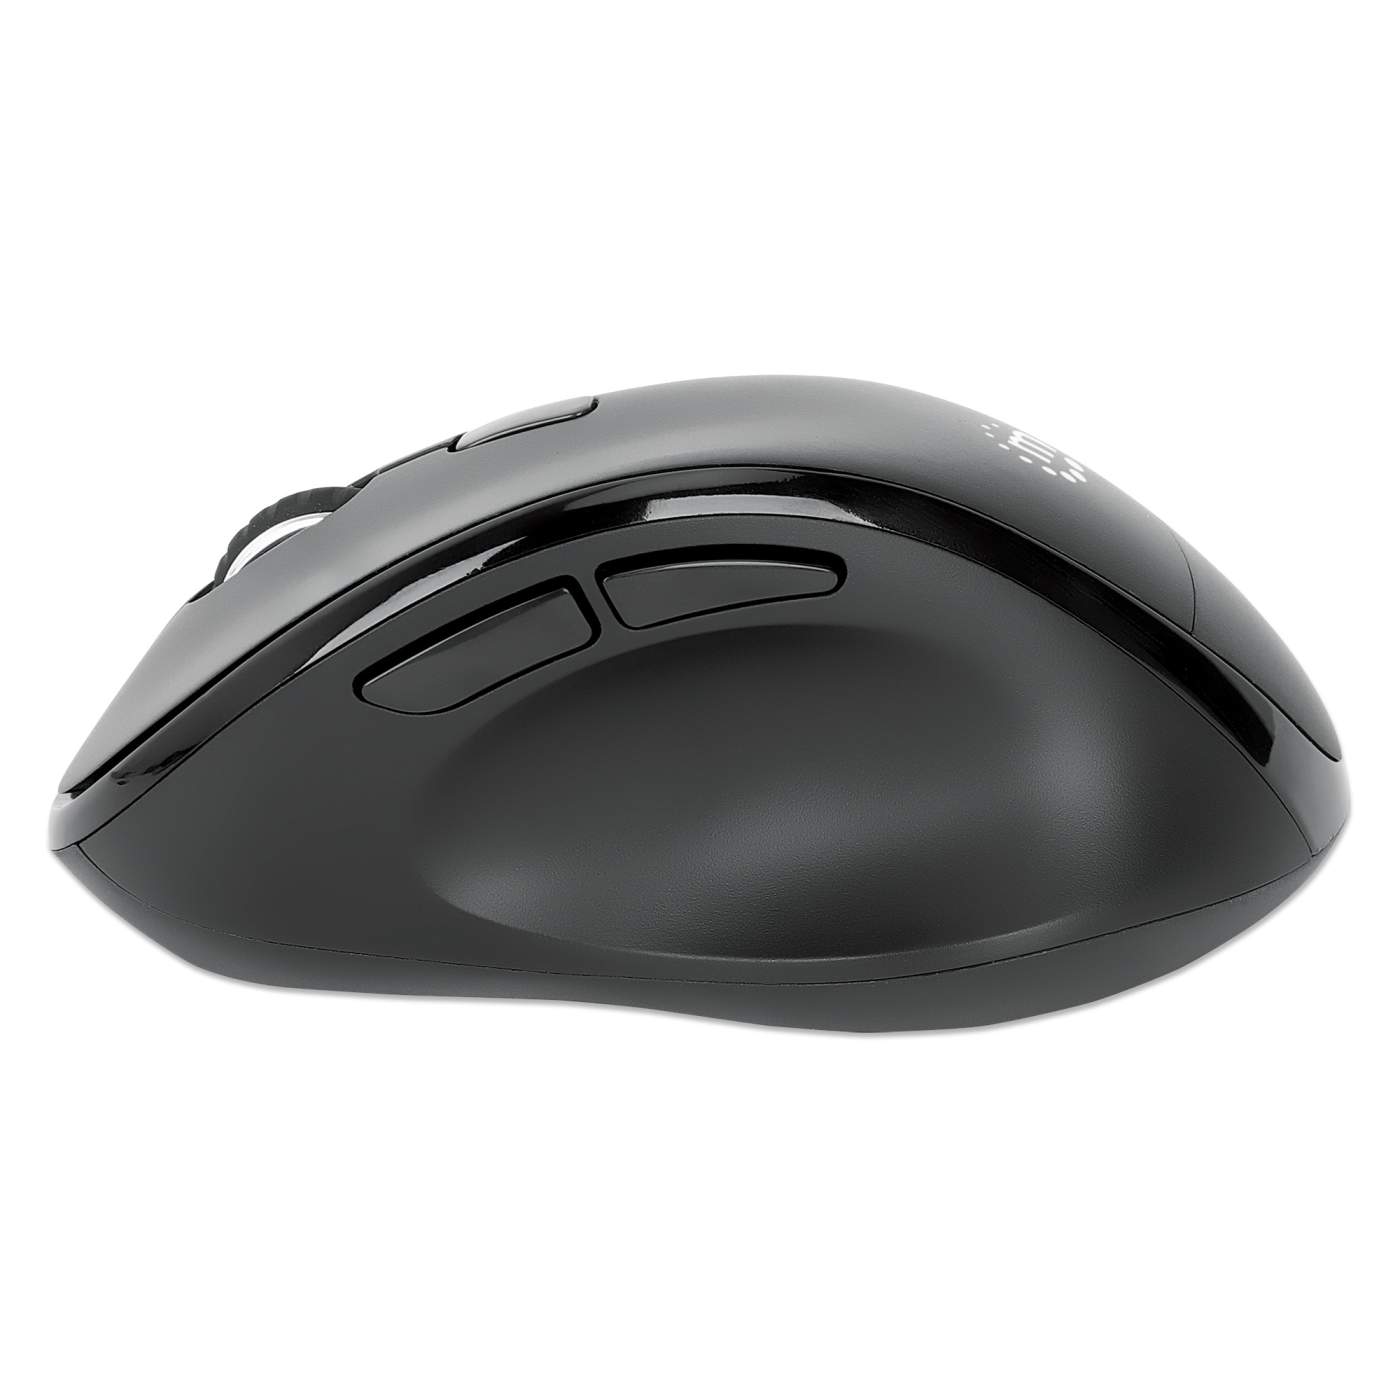 Wireless Ergonomic Mouse with 2-in-1 USB Receiver Image 6